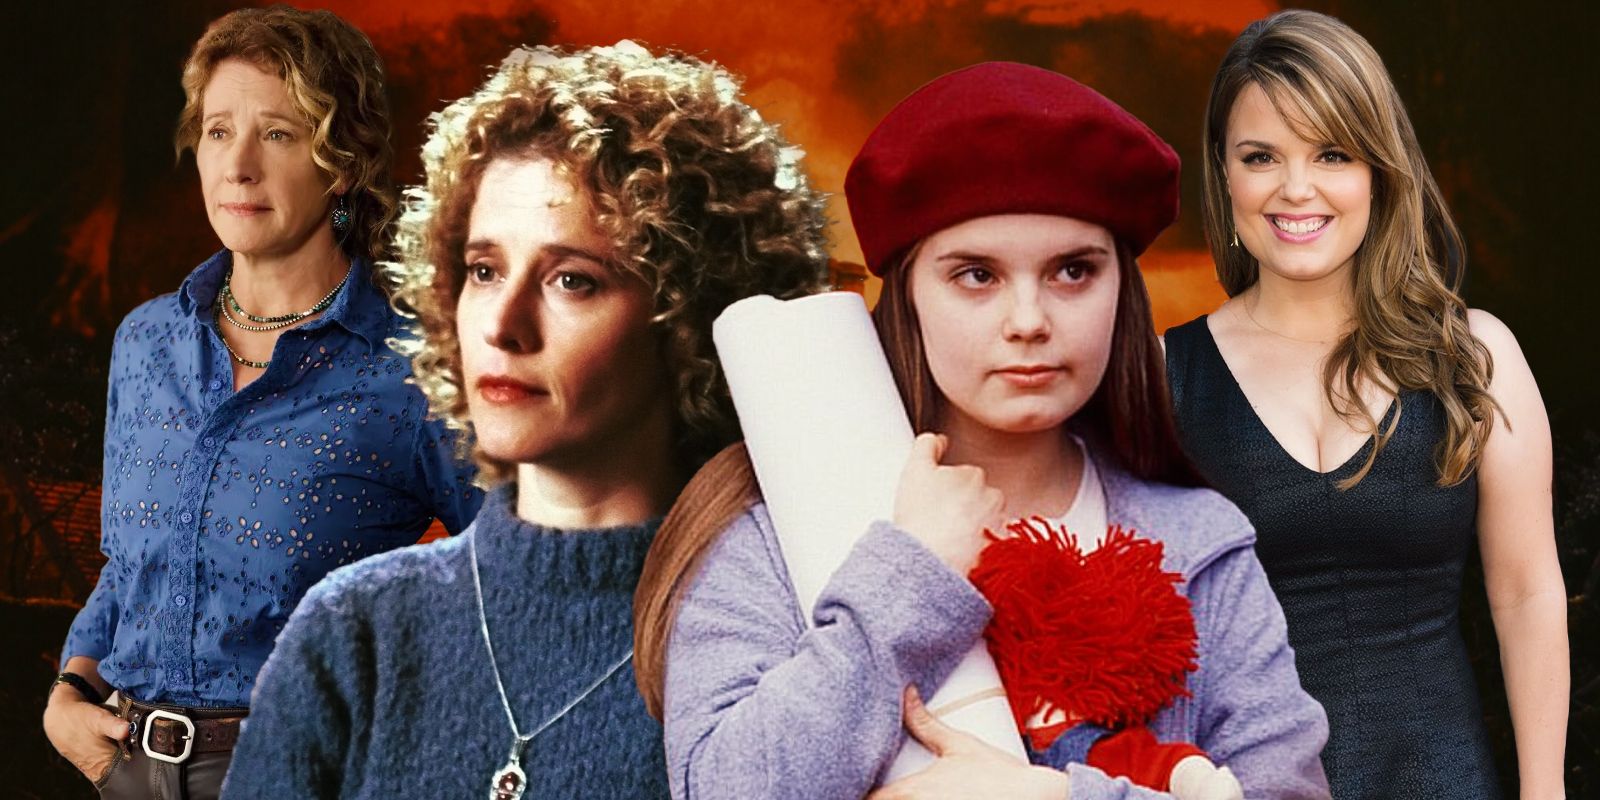 This collage shows actors Kimberley J. Brown and Nancy Travis in the movie Rose Red and now.